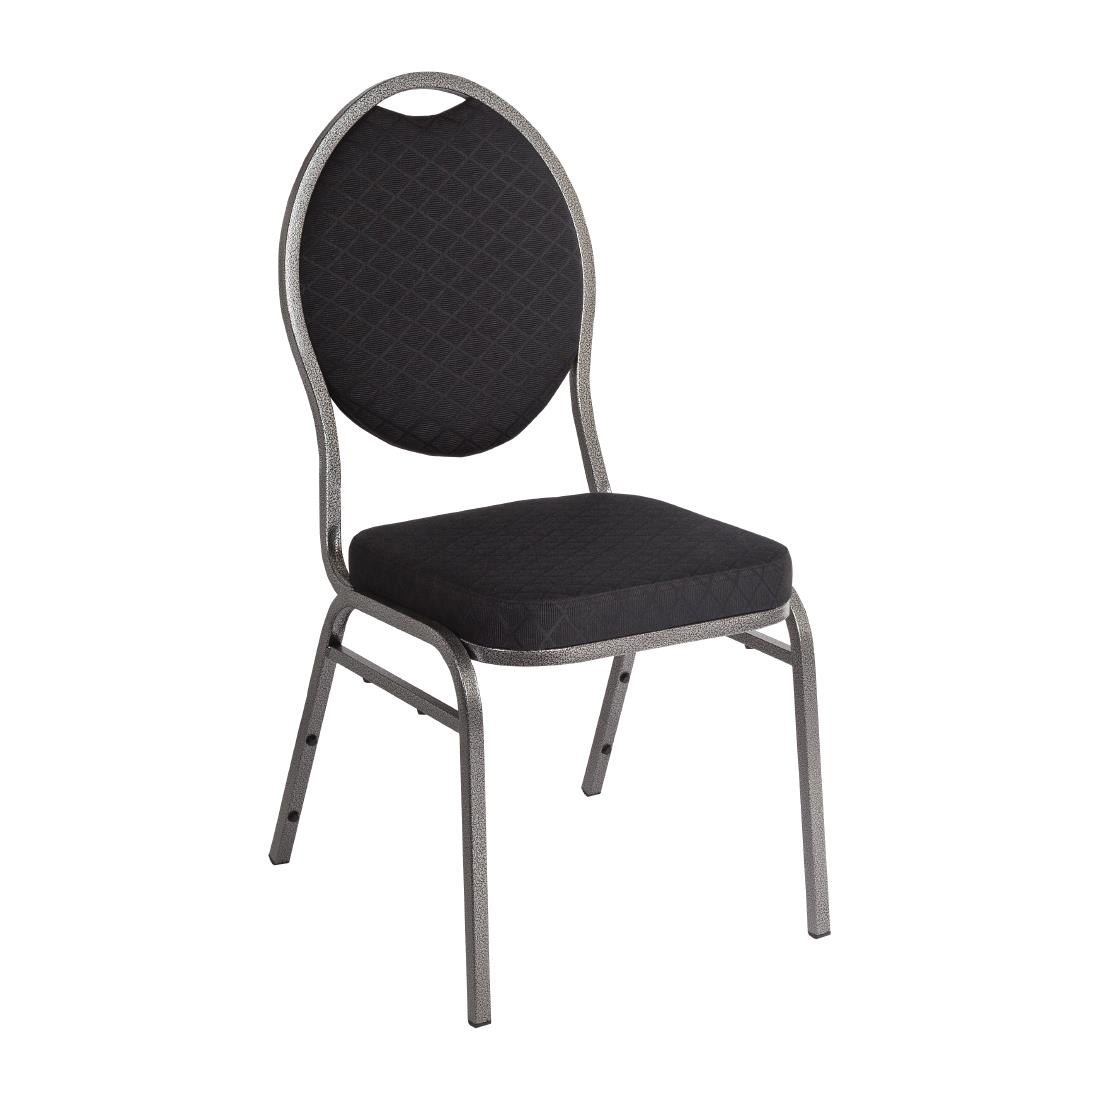 Oval Banqueting Chair - Black